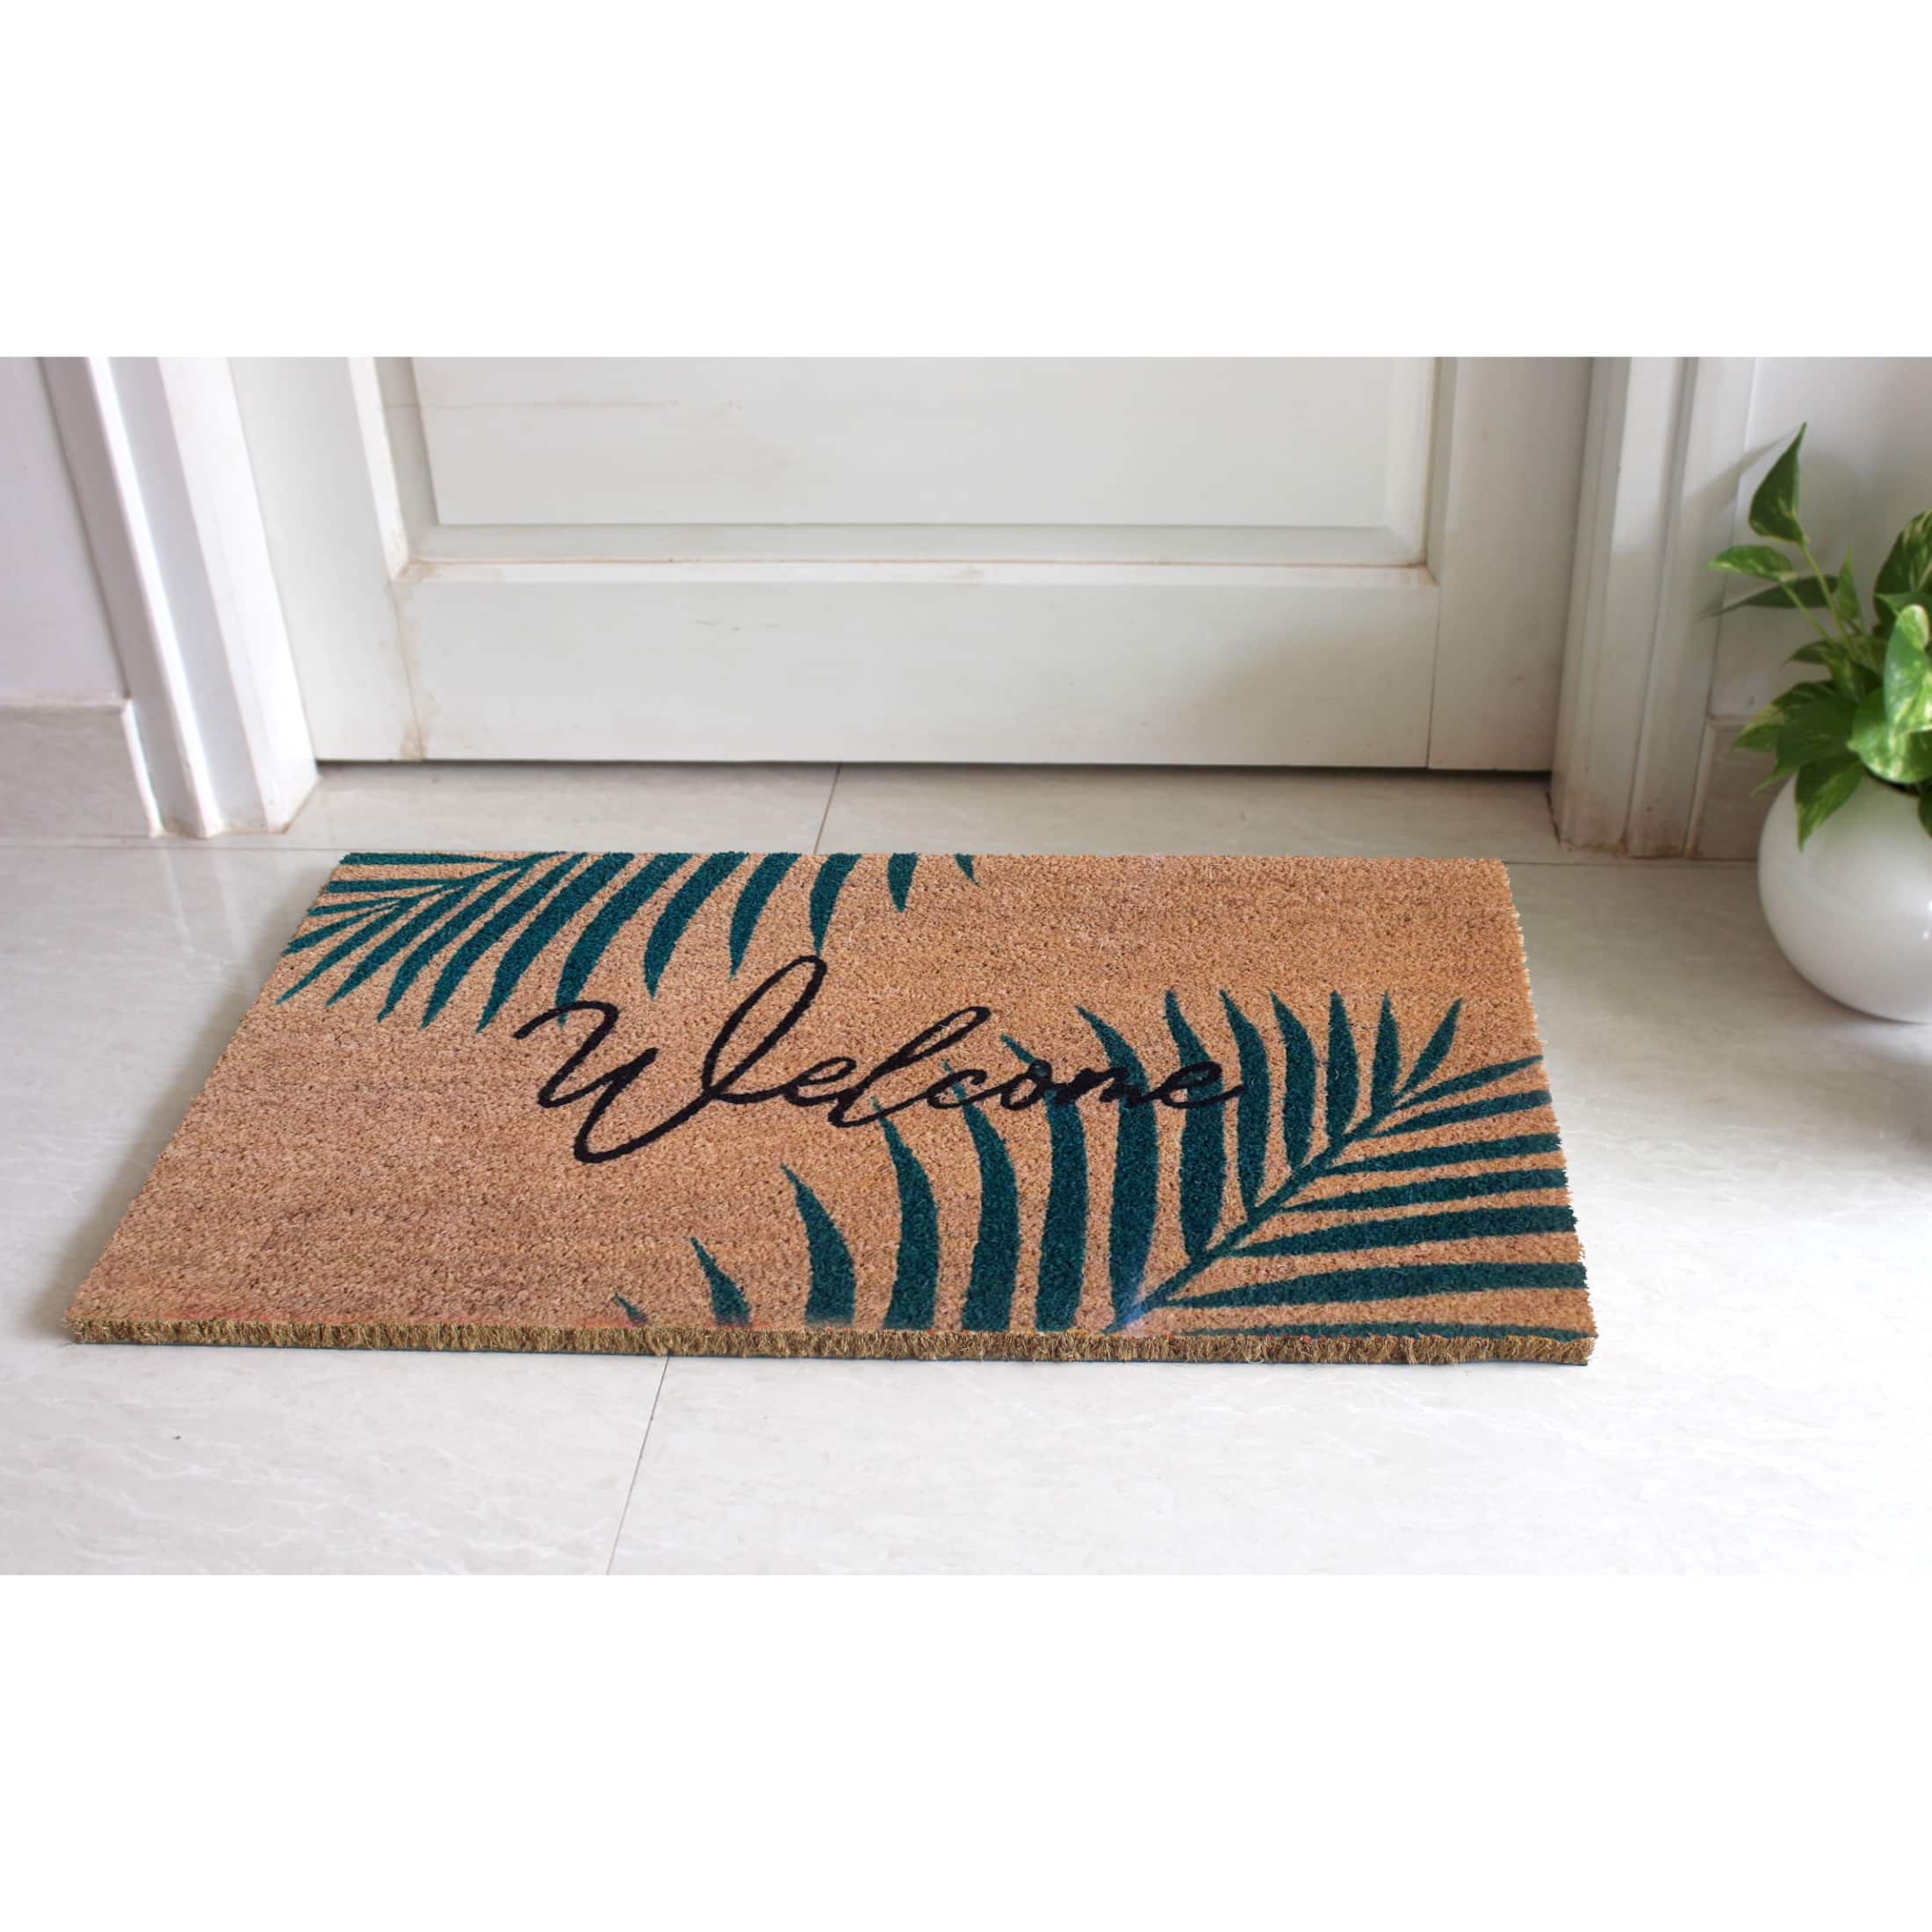 RugSmith Multicolor Machine Tufted Welcome Palm Leaves Doormat